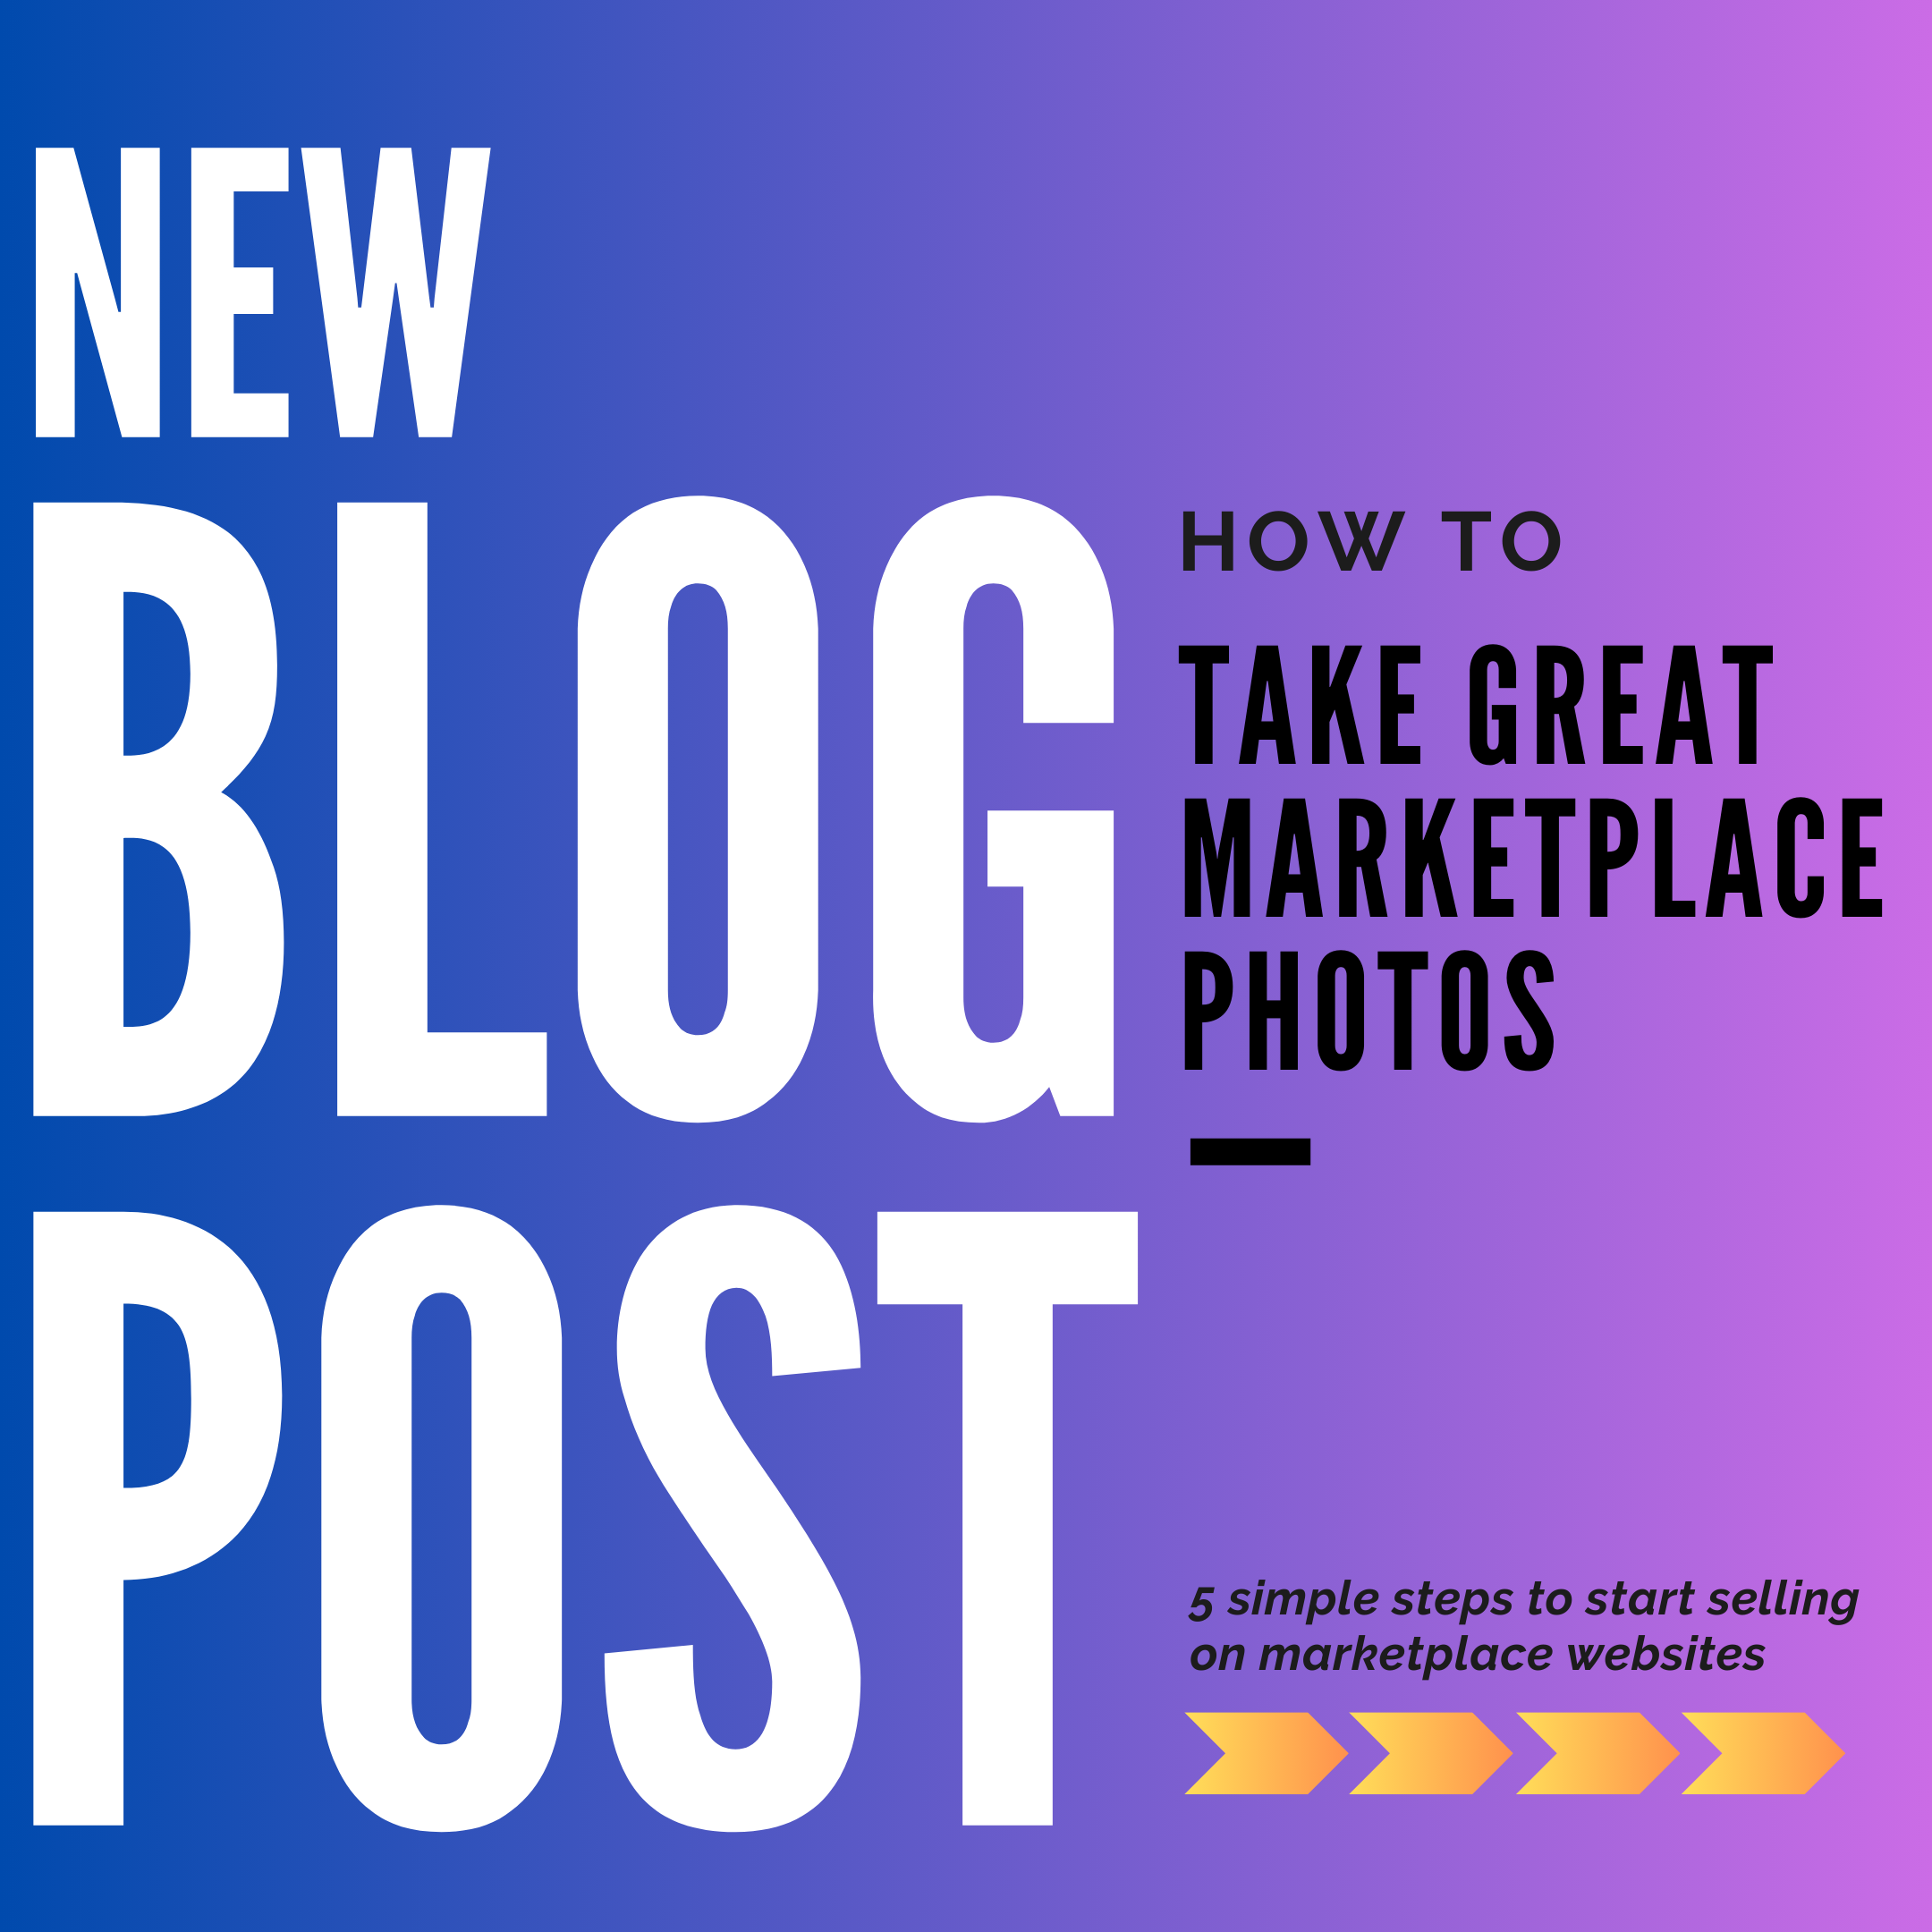 Take GREAT Marketplace Product photos in 5 easy steps